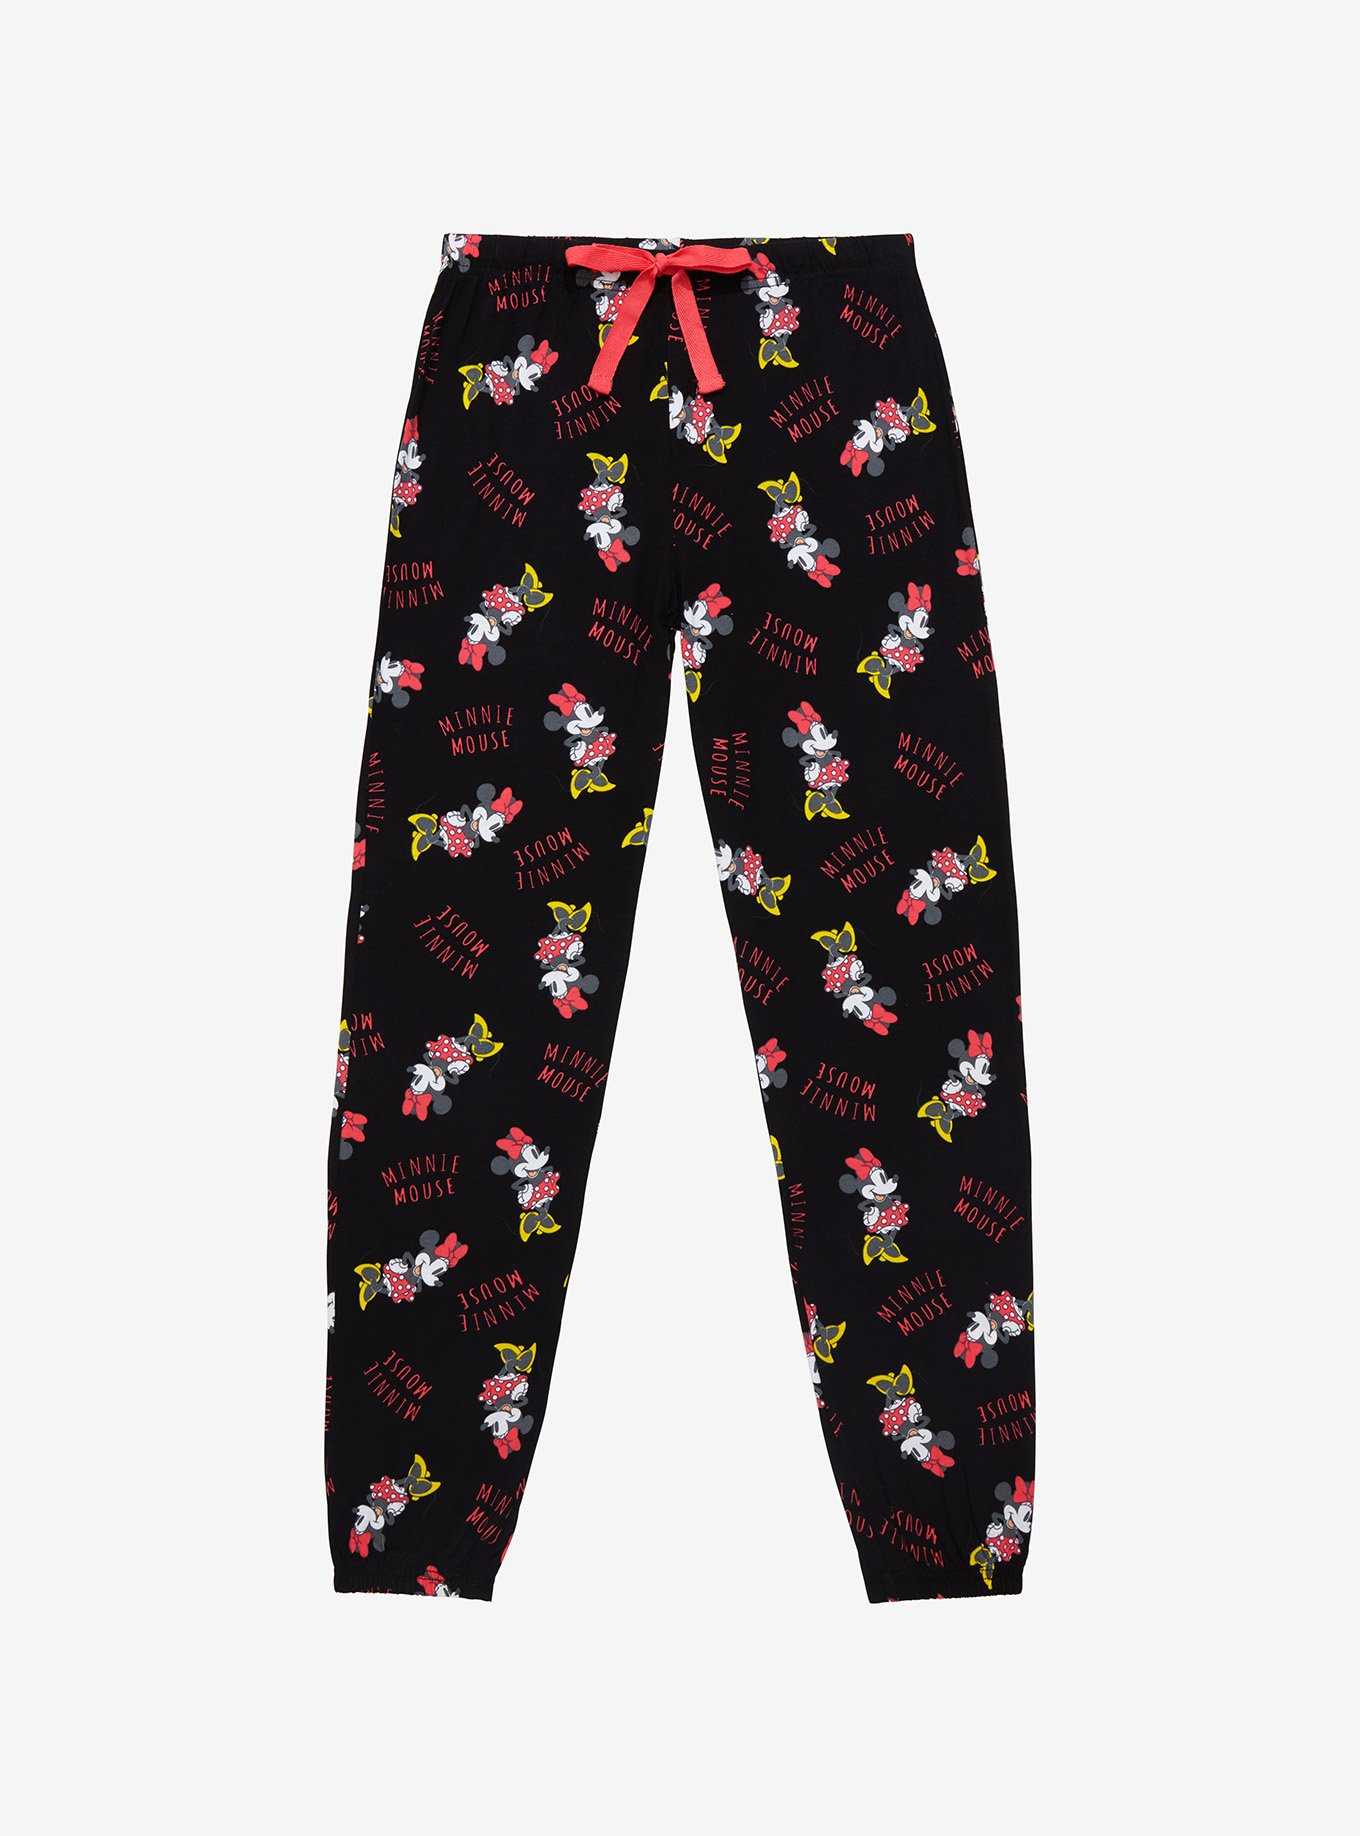 Disney Girls Lilo and Stitch Jogger Sweatpants with Minnie Mouse